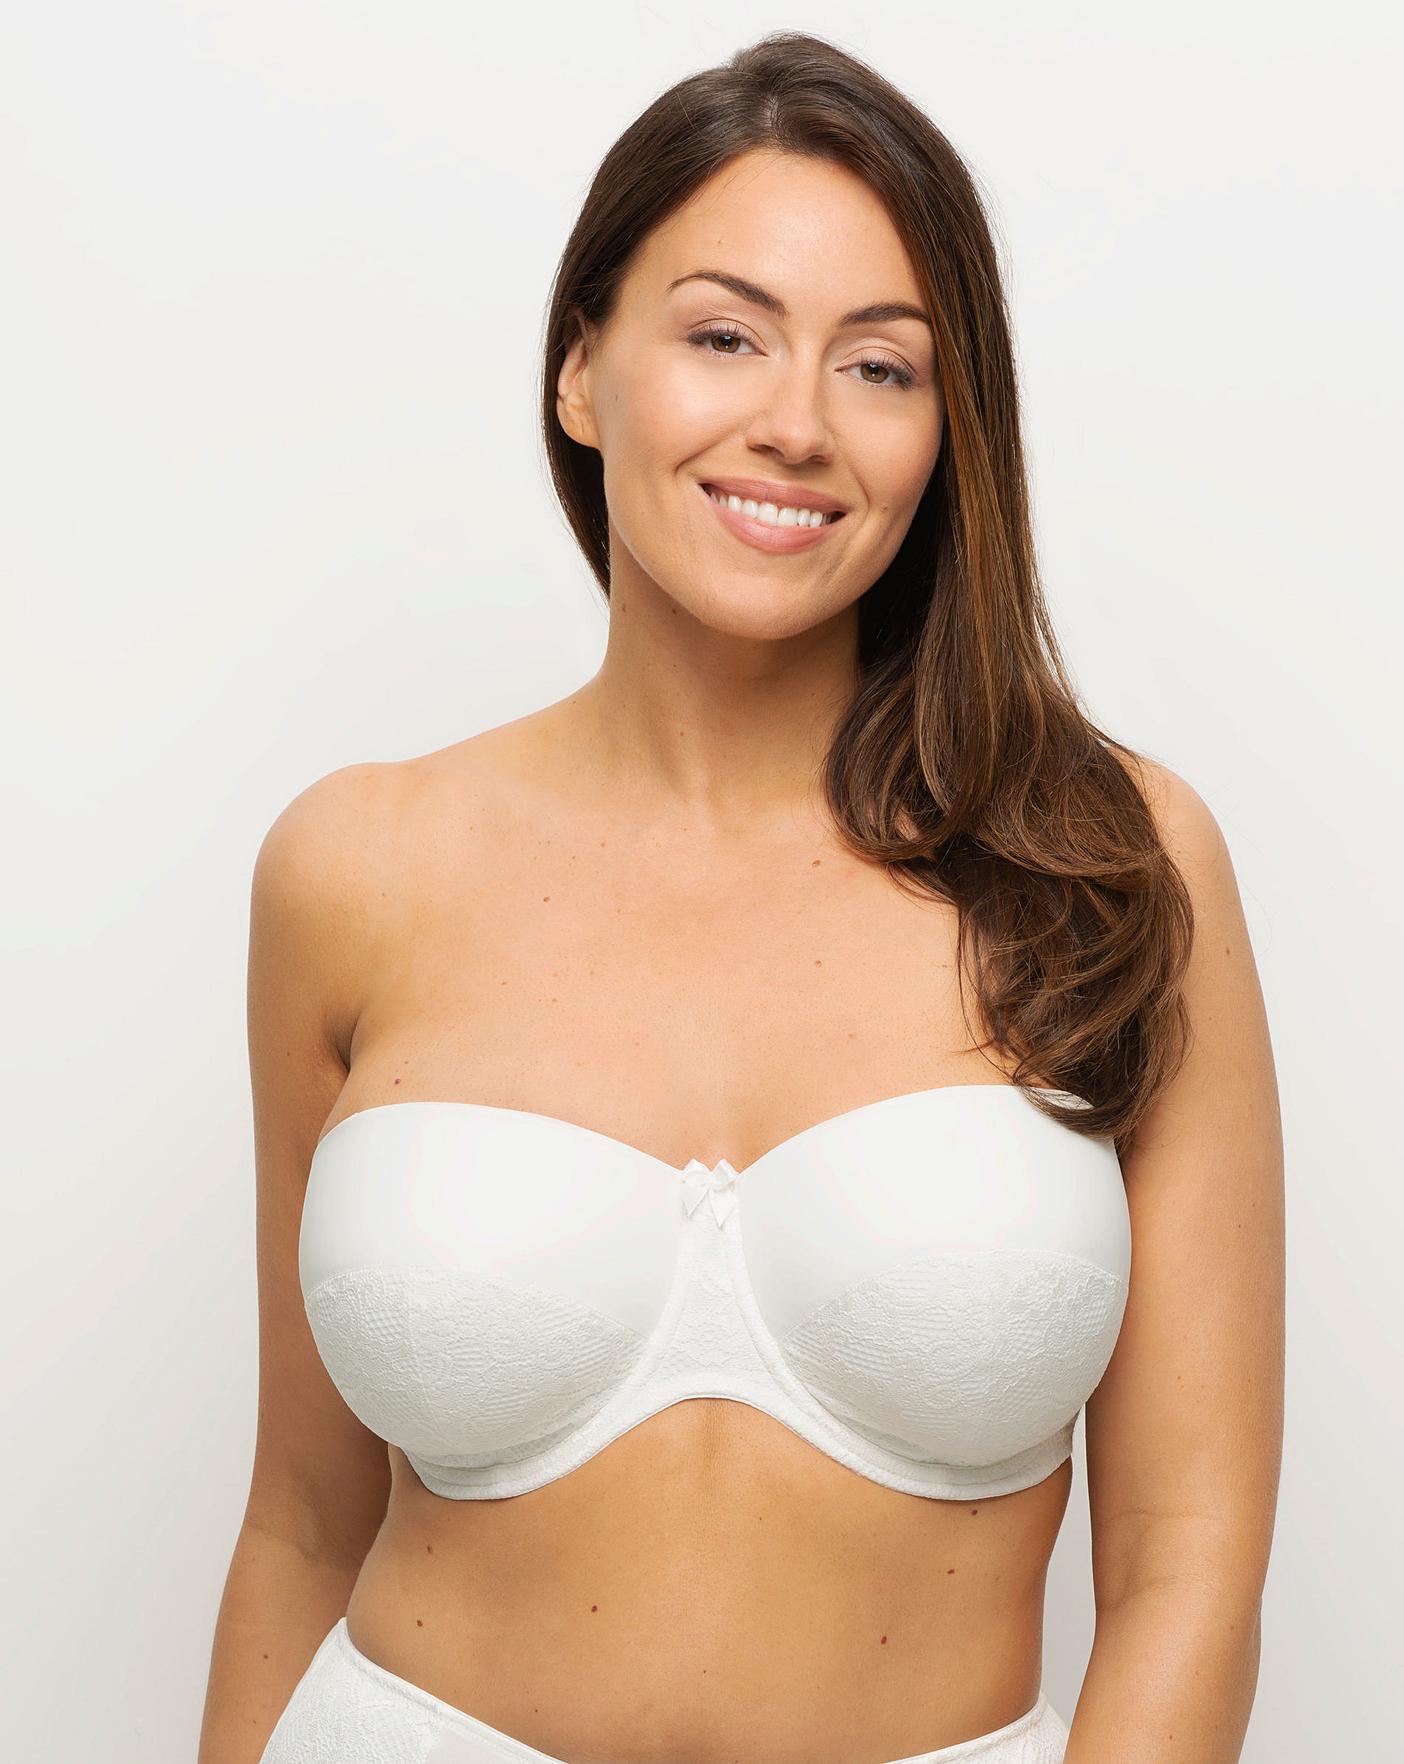 Strapless Bras 34GG, Bras for Large Breasts